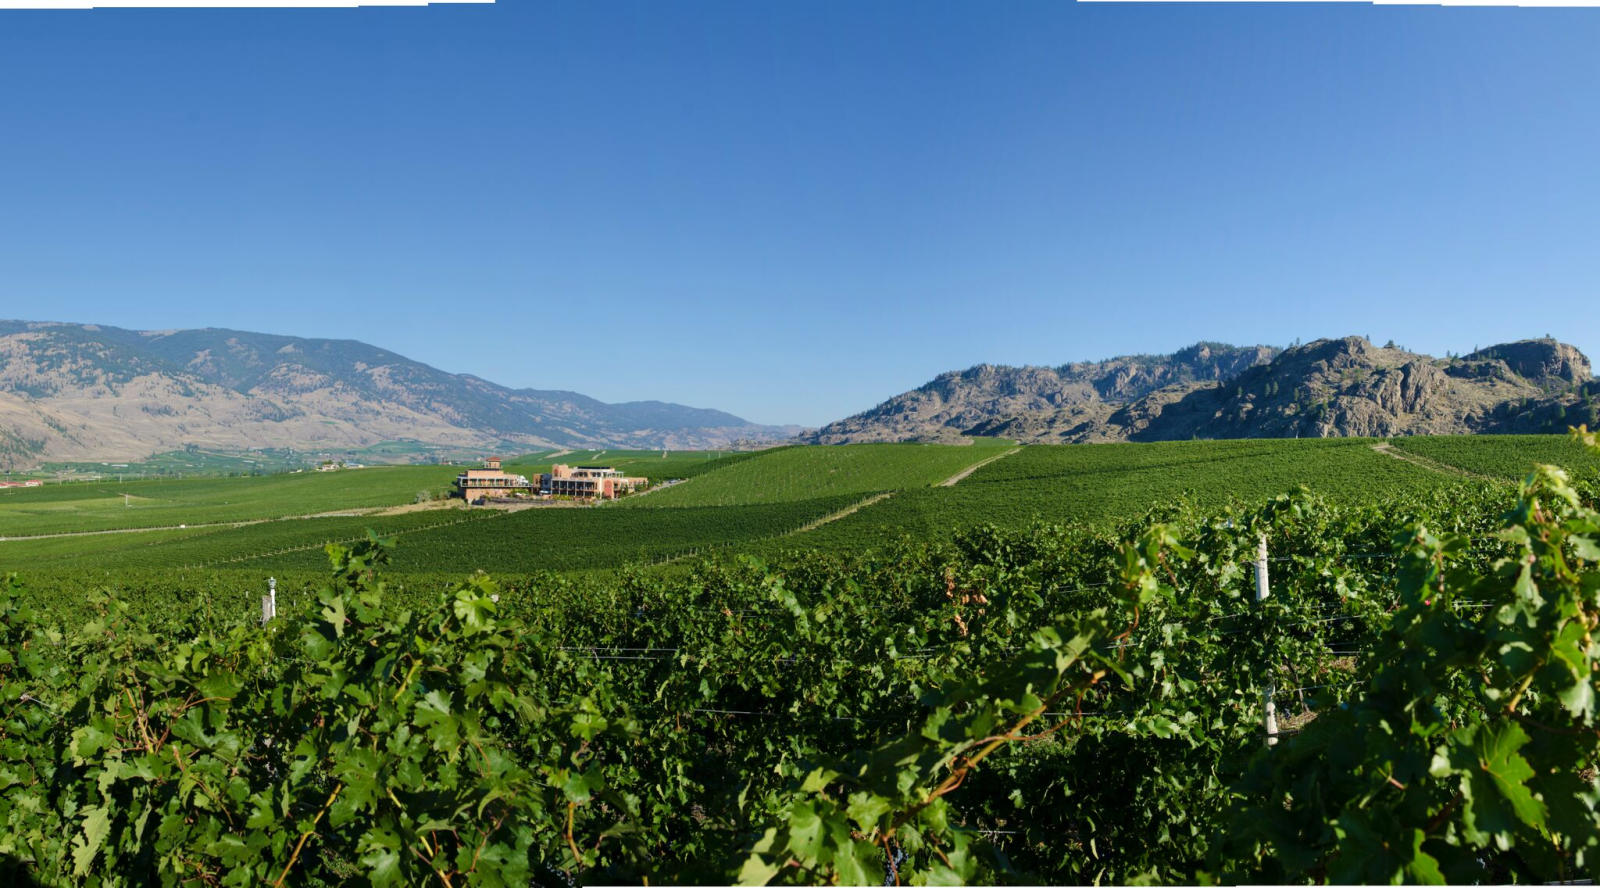 Burrowing Owl Winery. Photo by Burrowing Owl Winery